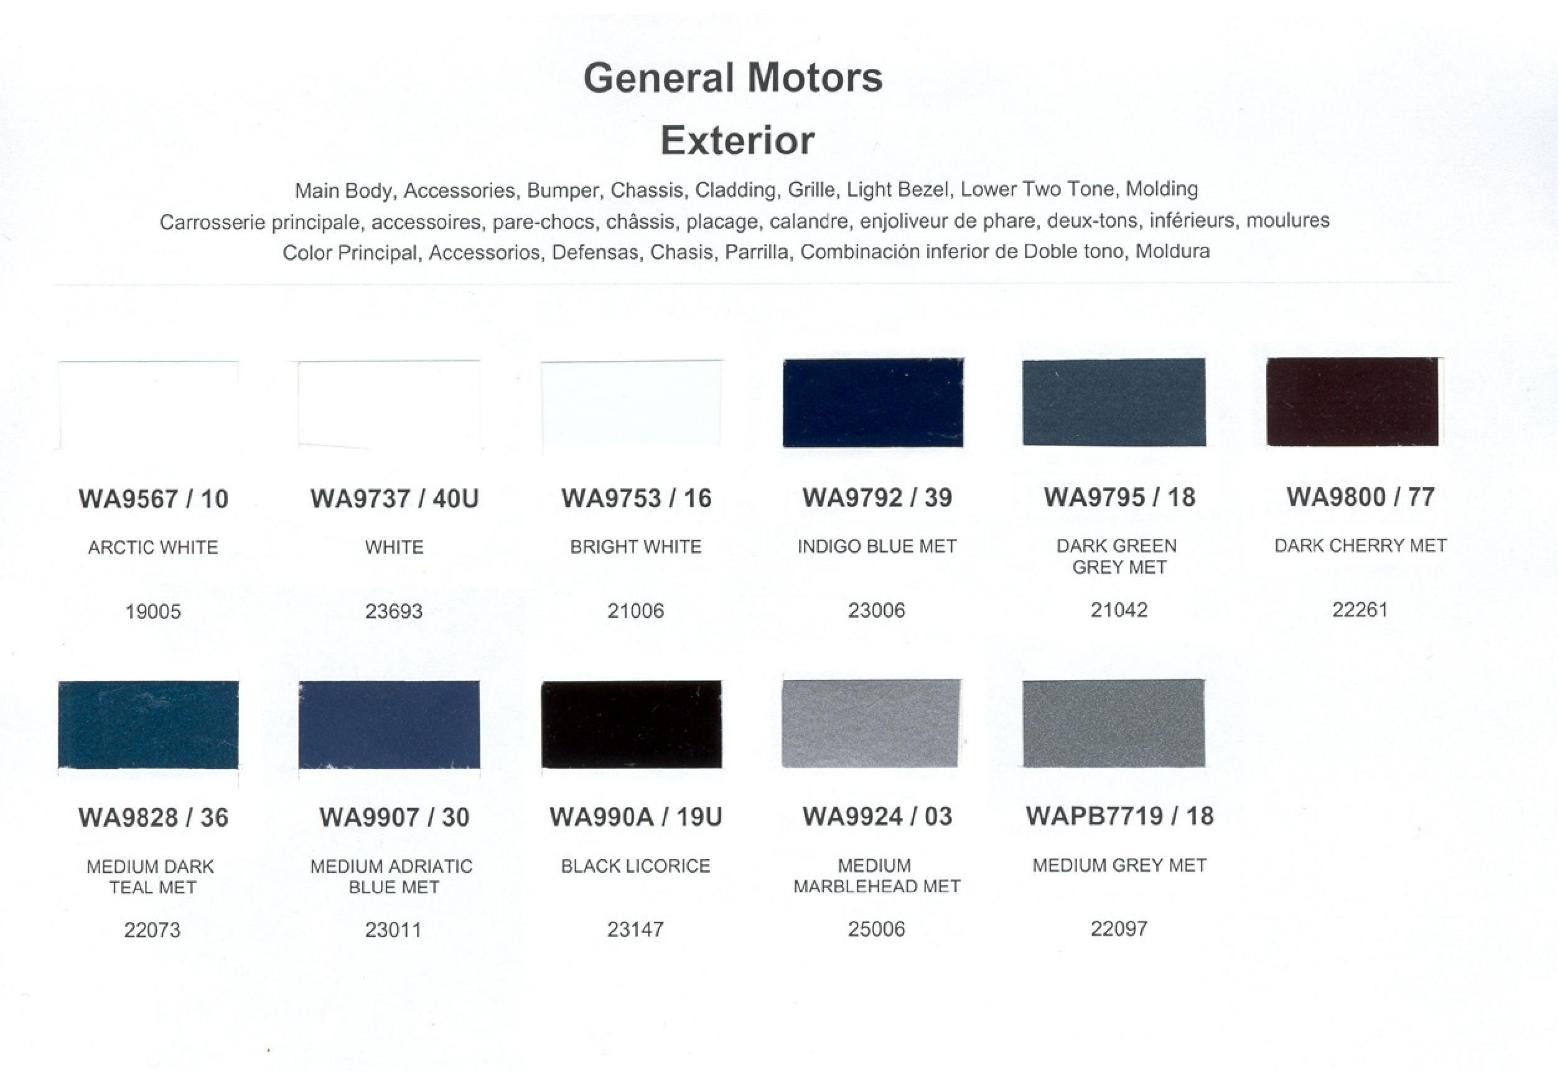 Paint Color Examaples used on GM Vehicles and thier unique paint codes